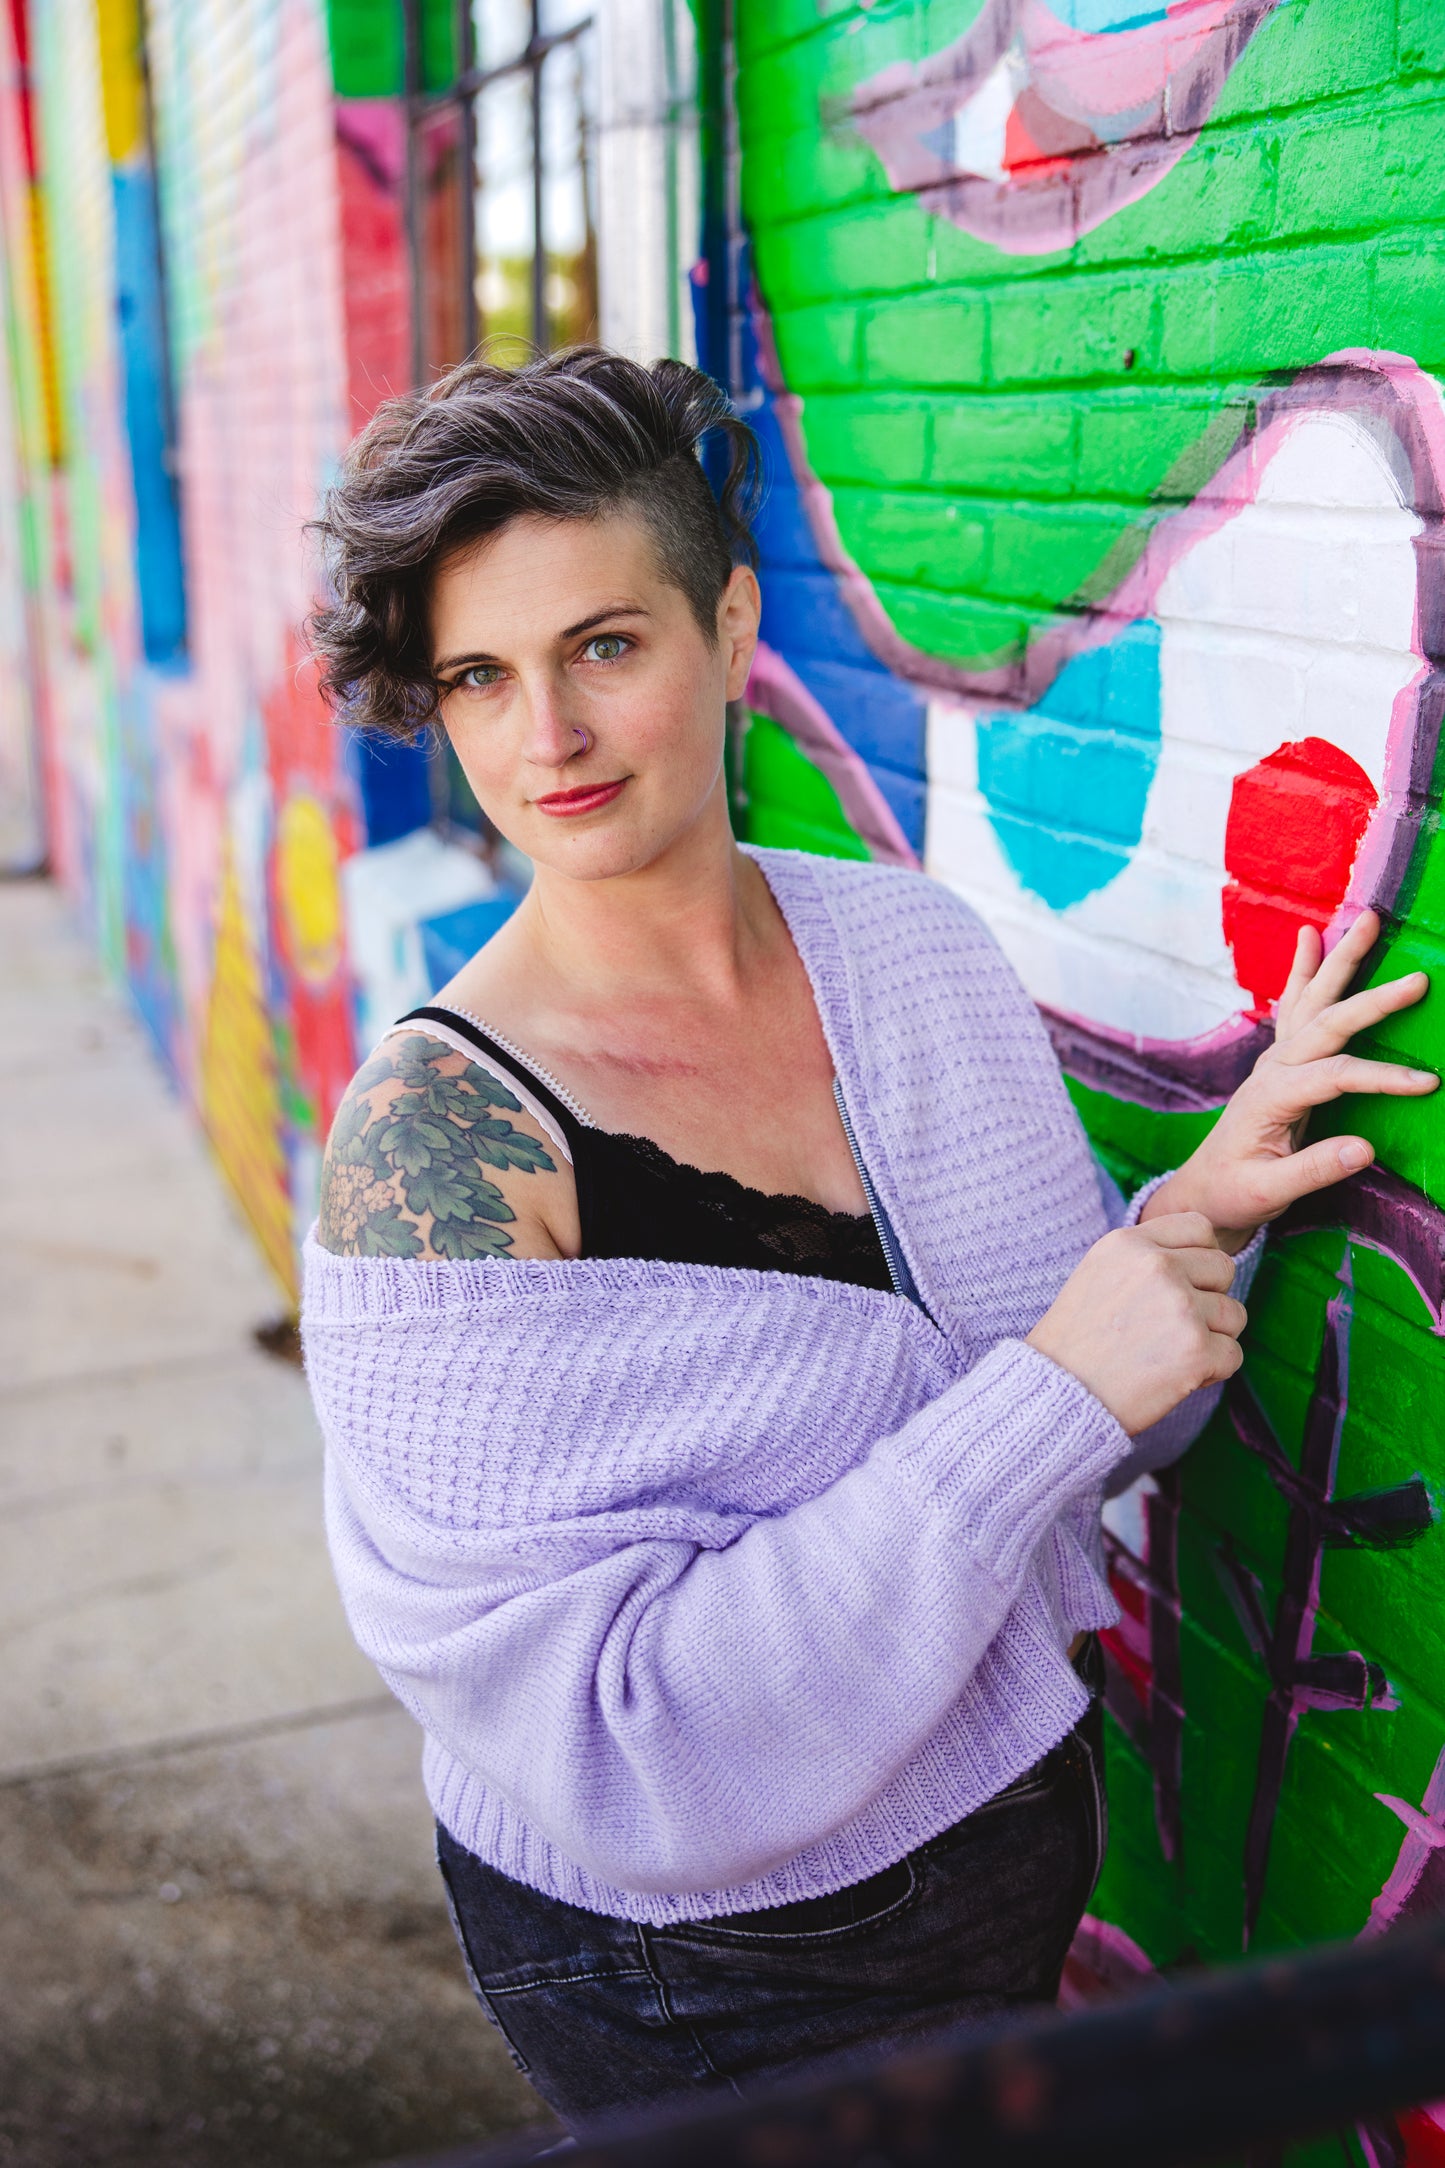 Jen, standing next to a wall mural, looks past the camera. She wears a light purple knit sweater, partially unzipped so it falls off one shoulder revealing a black camisole.